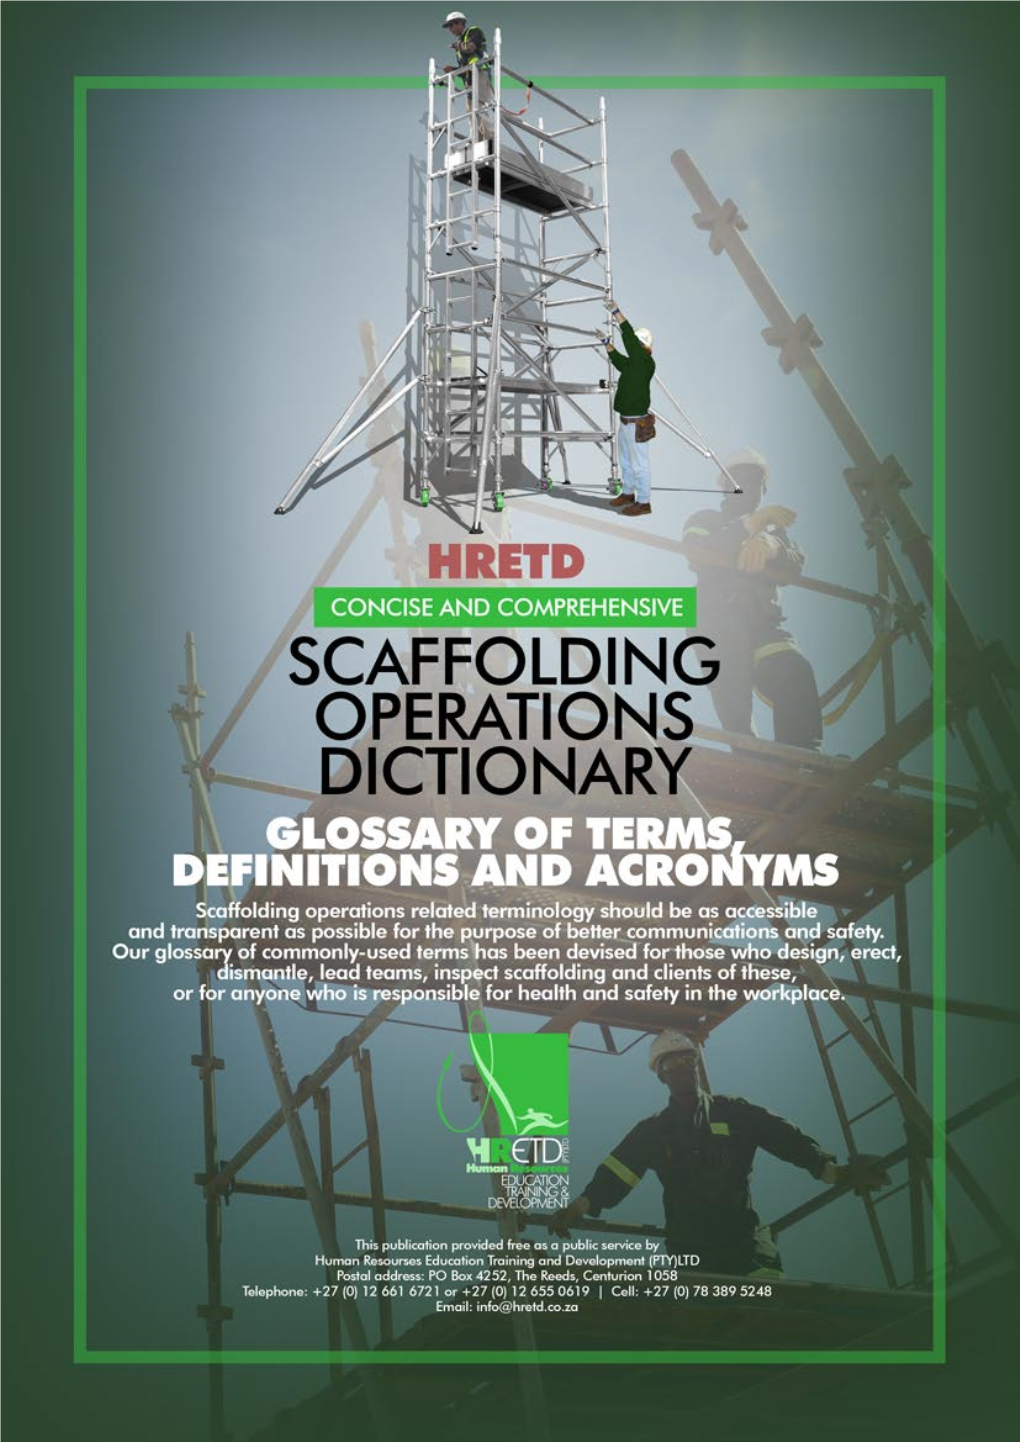 Hretd Concise and Comprehensive Scaffoling Operations Dictionary